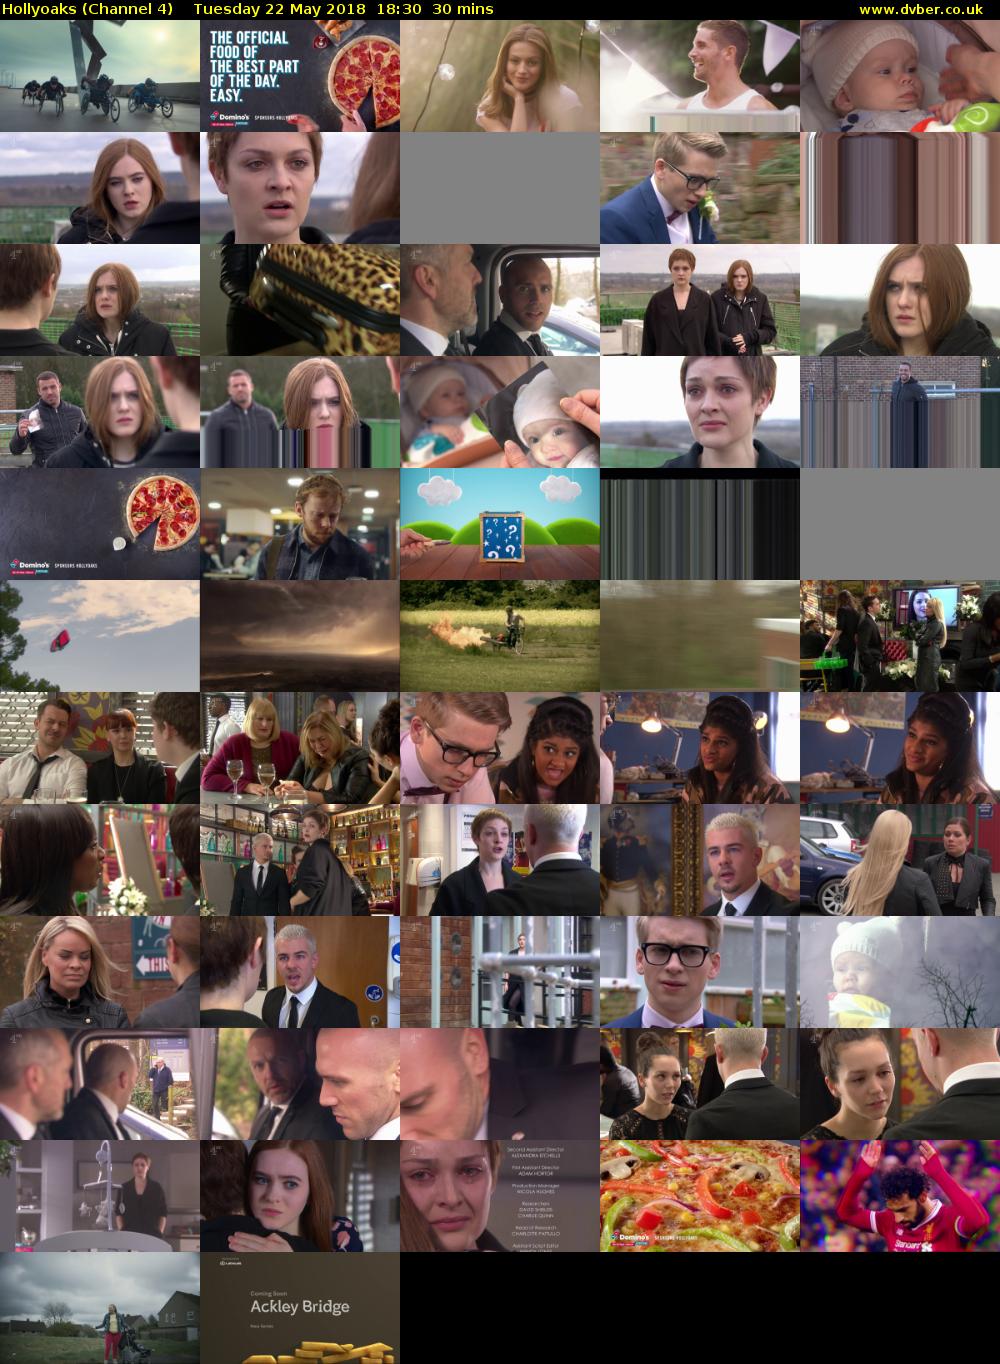 Hollyoaks (Channel 4) Tuesday 22 May 2018 18:30 - 19:00